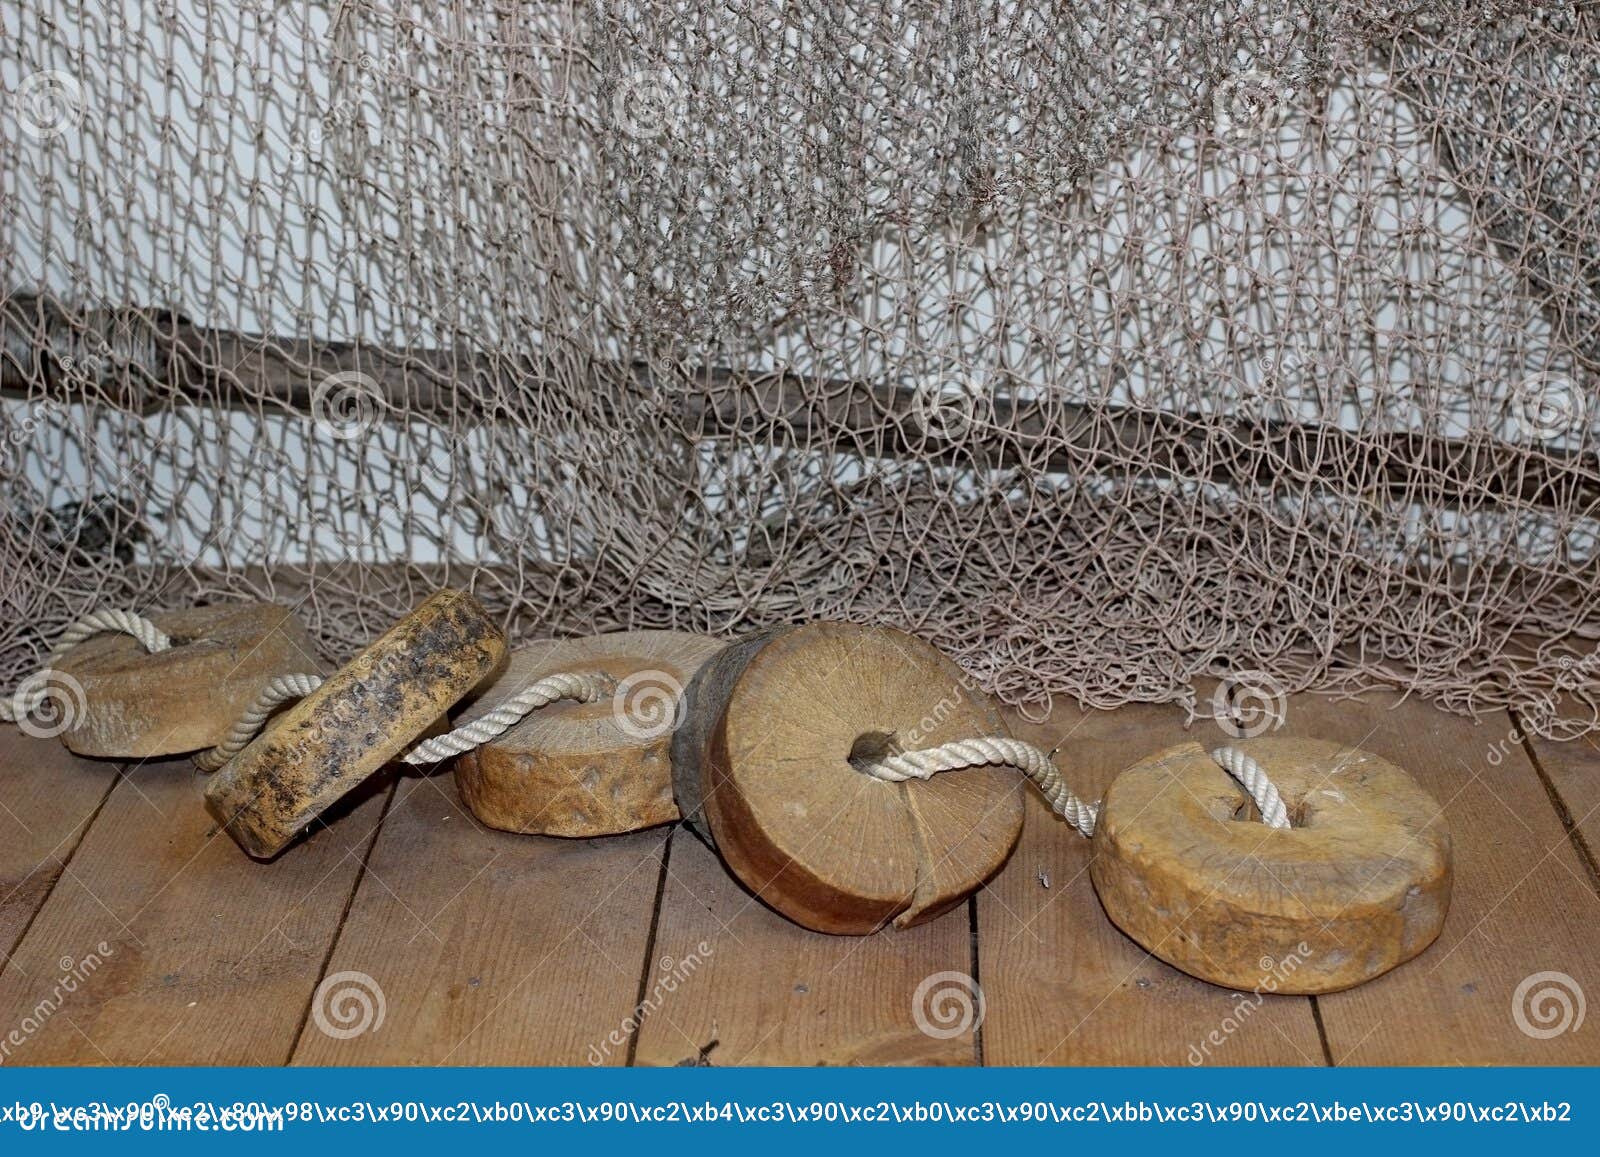 Fishing Nets with Wooden Floats on a Wooden Floor Stock Photo